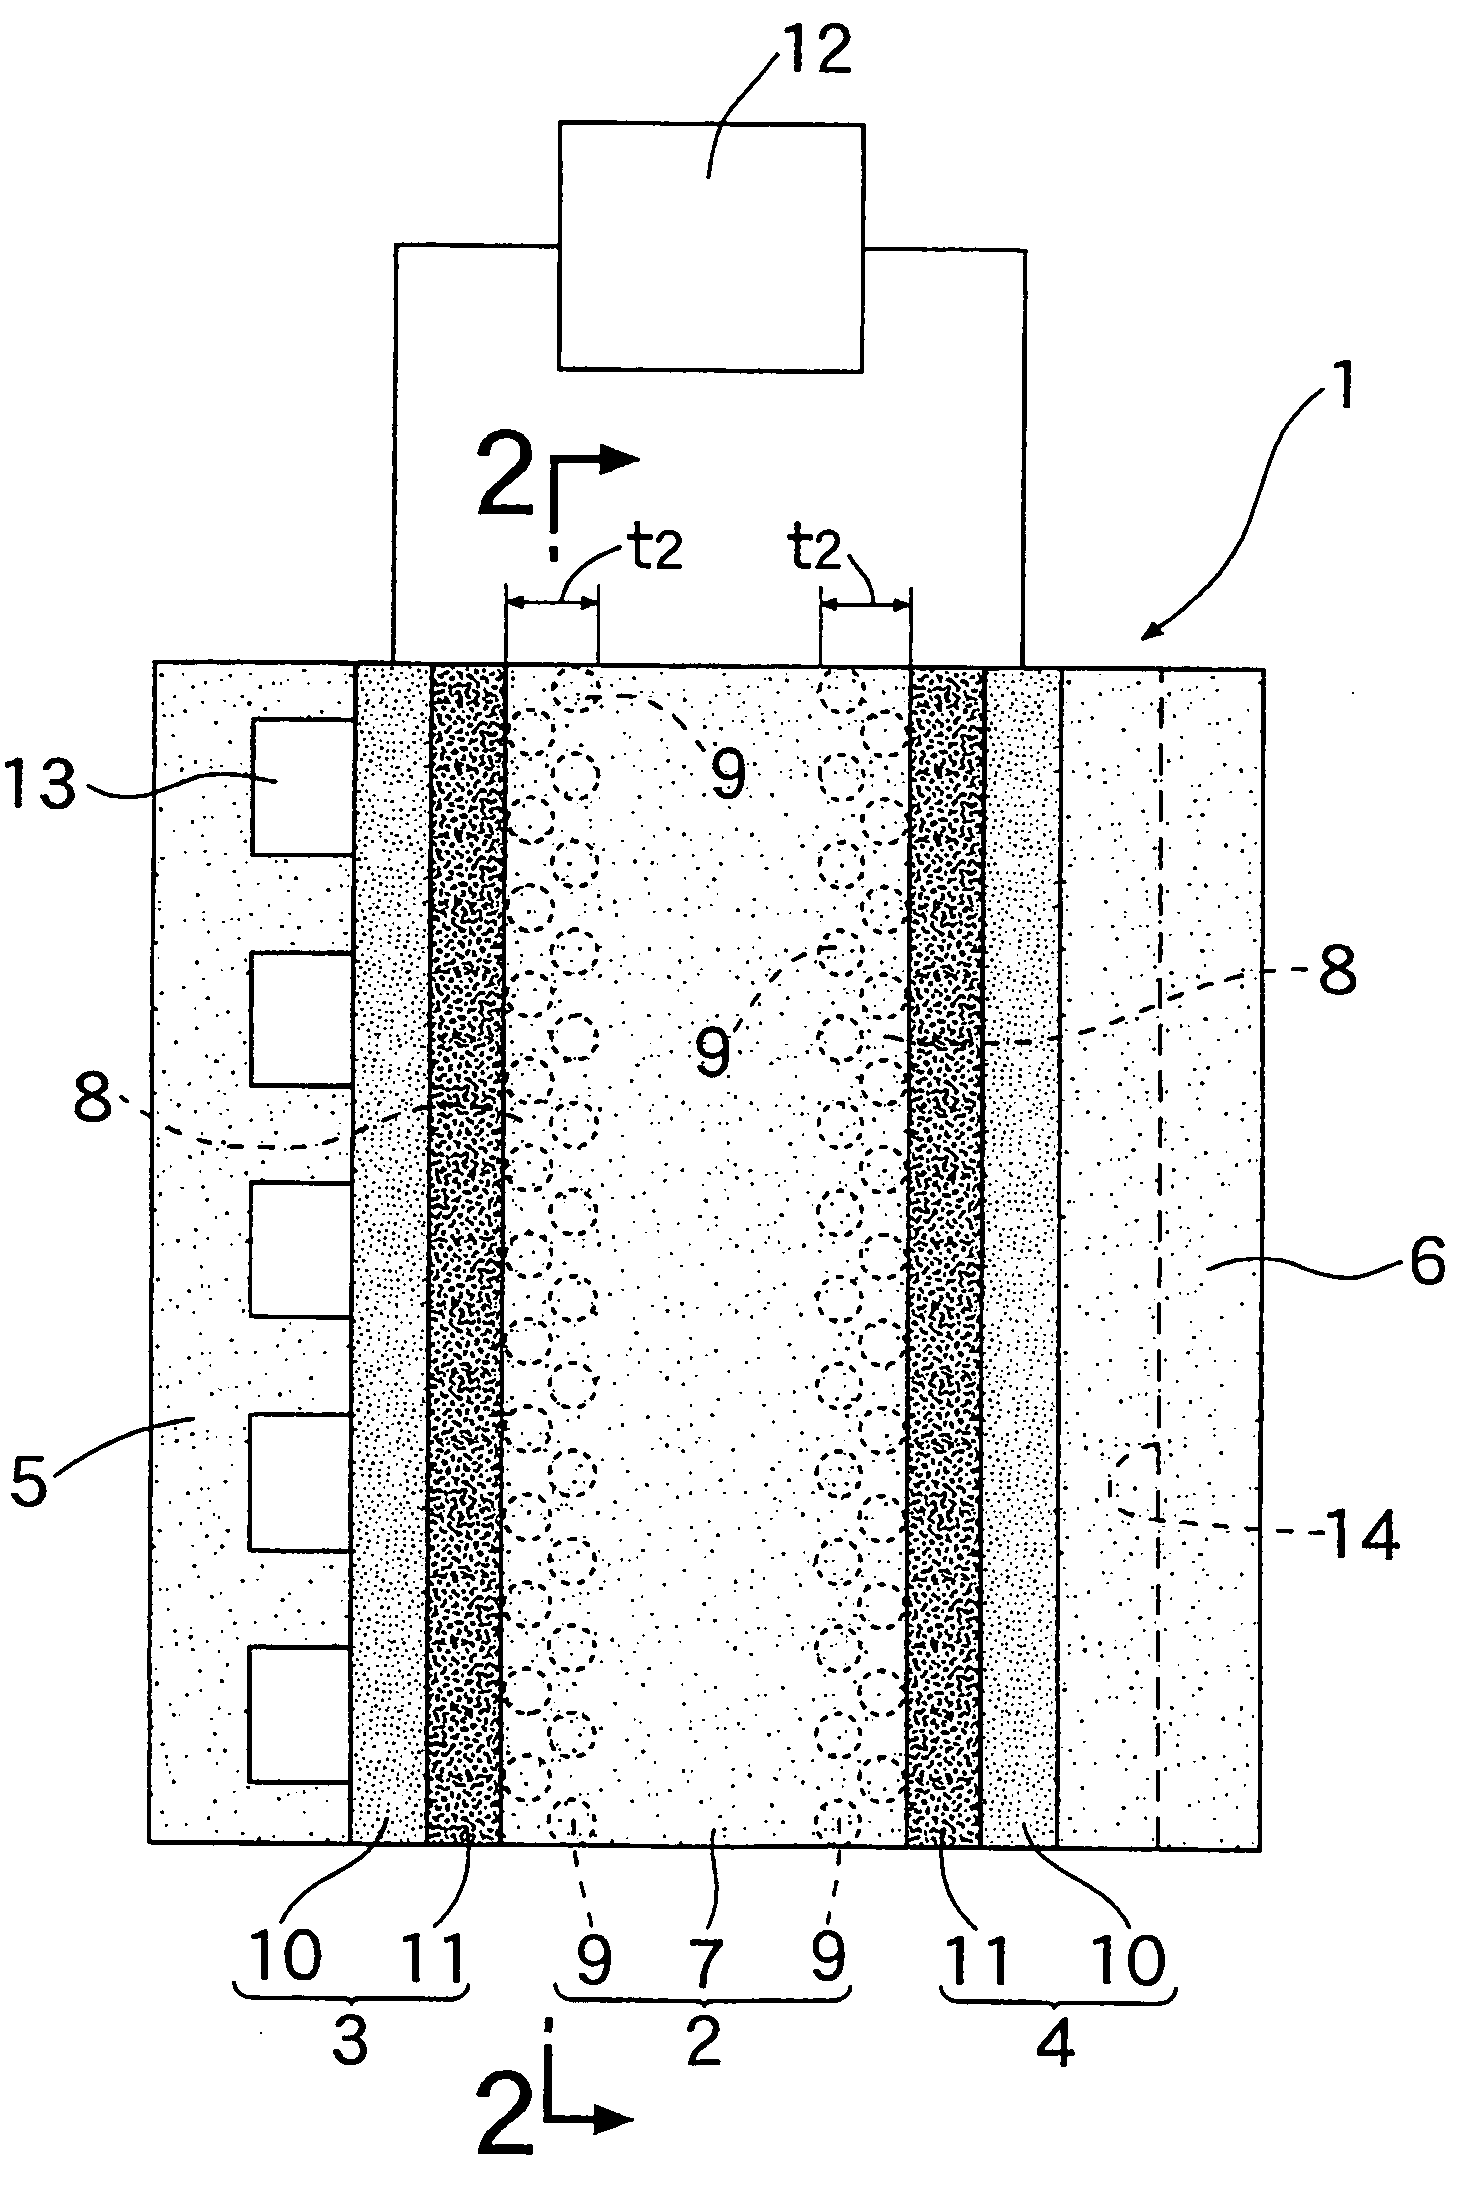 Active solid polymer electrolyte membrane for solid polymer electrolyte fuel cell